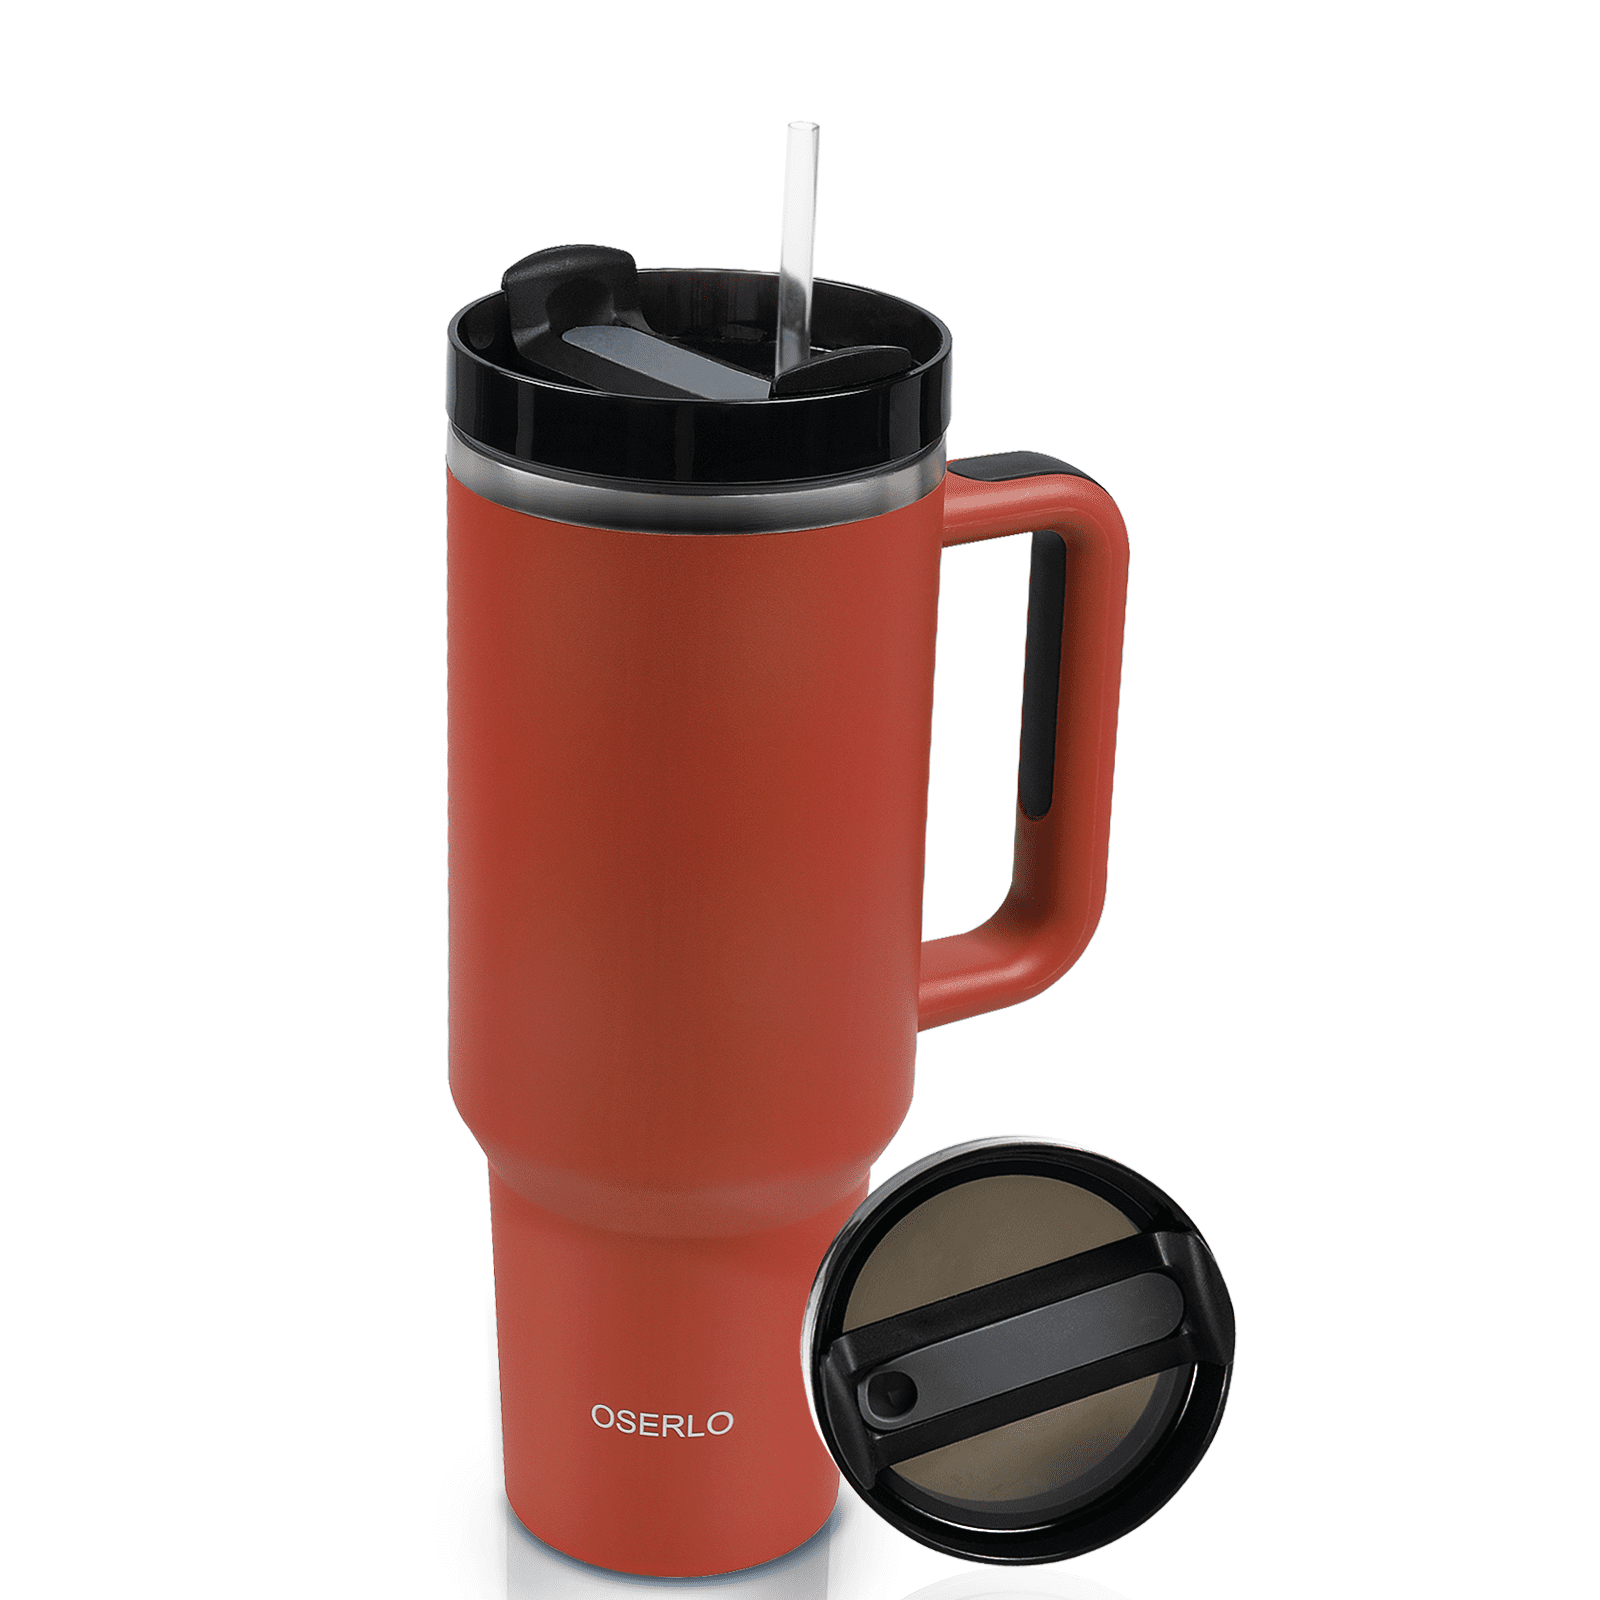 Stanley Quencher 2.0 Stainless Steel Vacuum Insulated Tumbler with Lid and  Straw 40oz Thermal Travel Mug Coffee Hot Cup - AliExpress